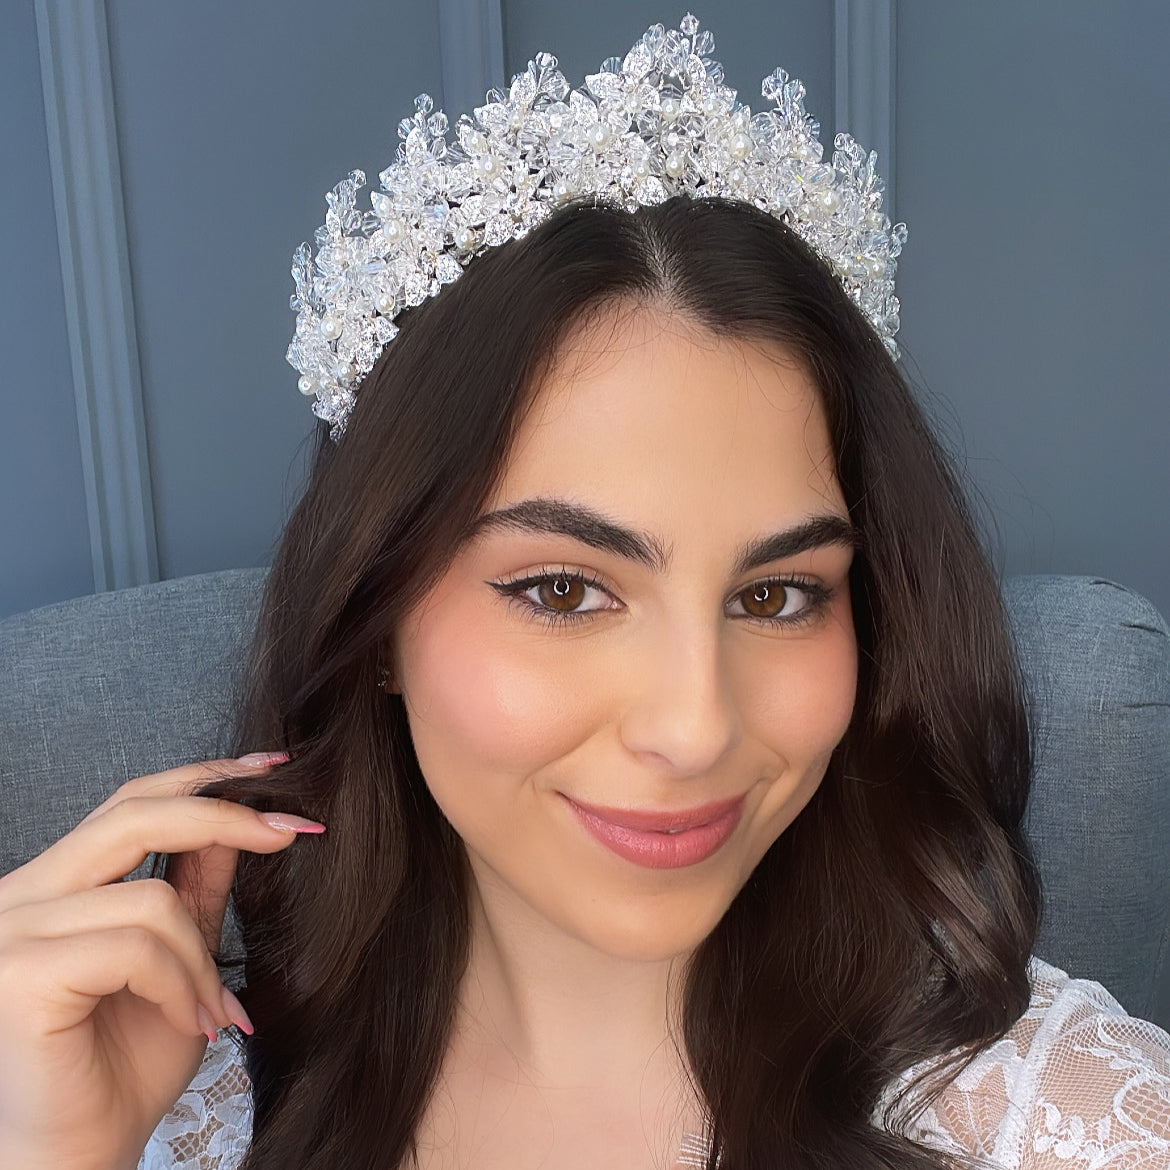 Monarch Bridal Crown with Pearls Hair Accessories - Tiara & Crown  Silver with Pearls  